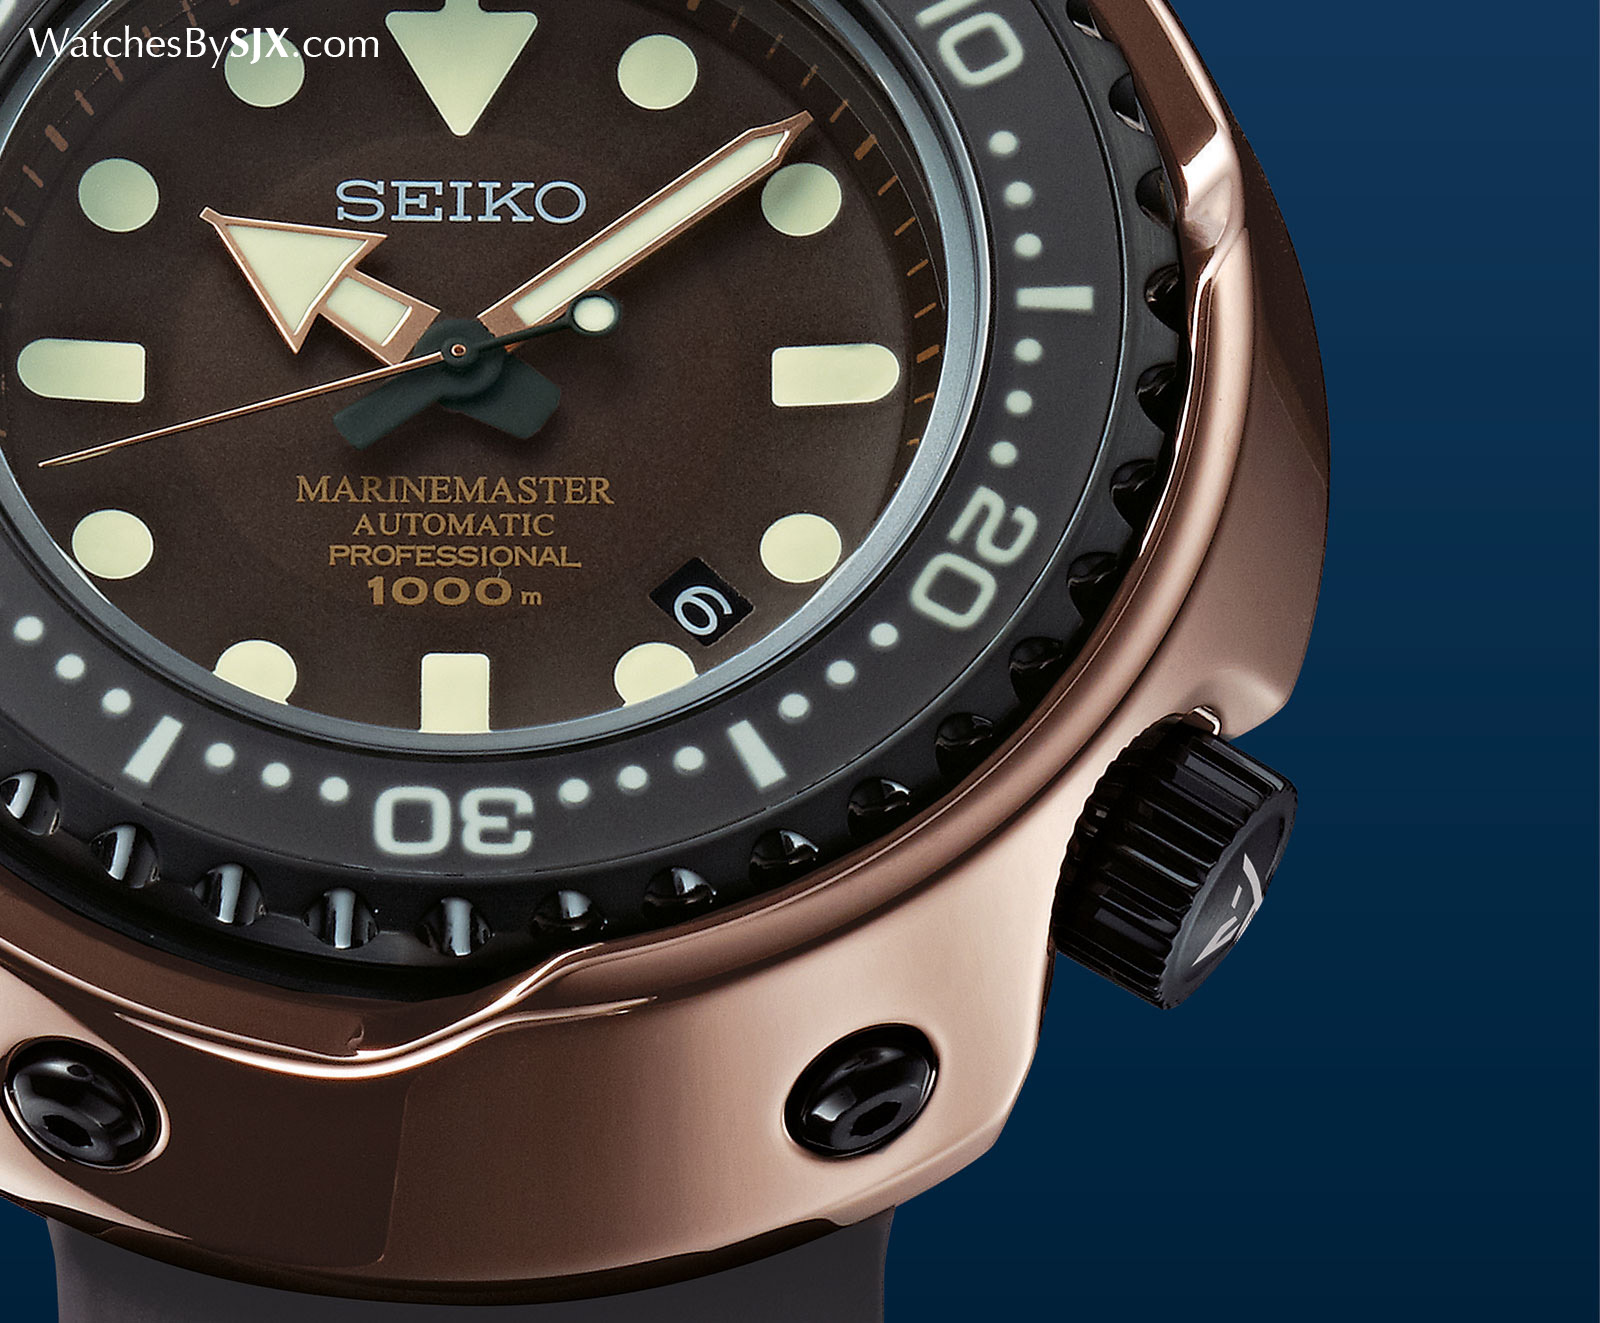 Seiko Introduces The Prospex Marinemaster 1000m Cermet “Tuna” Limited  Editions (With Price) | SJX Watches